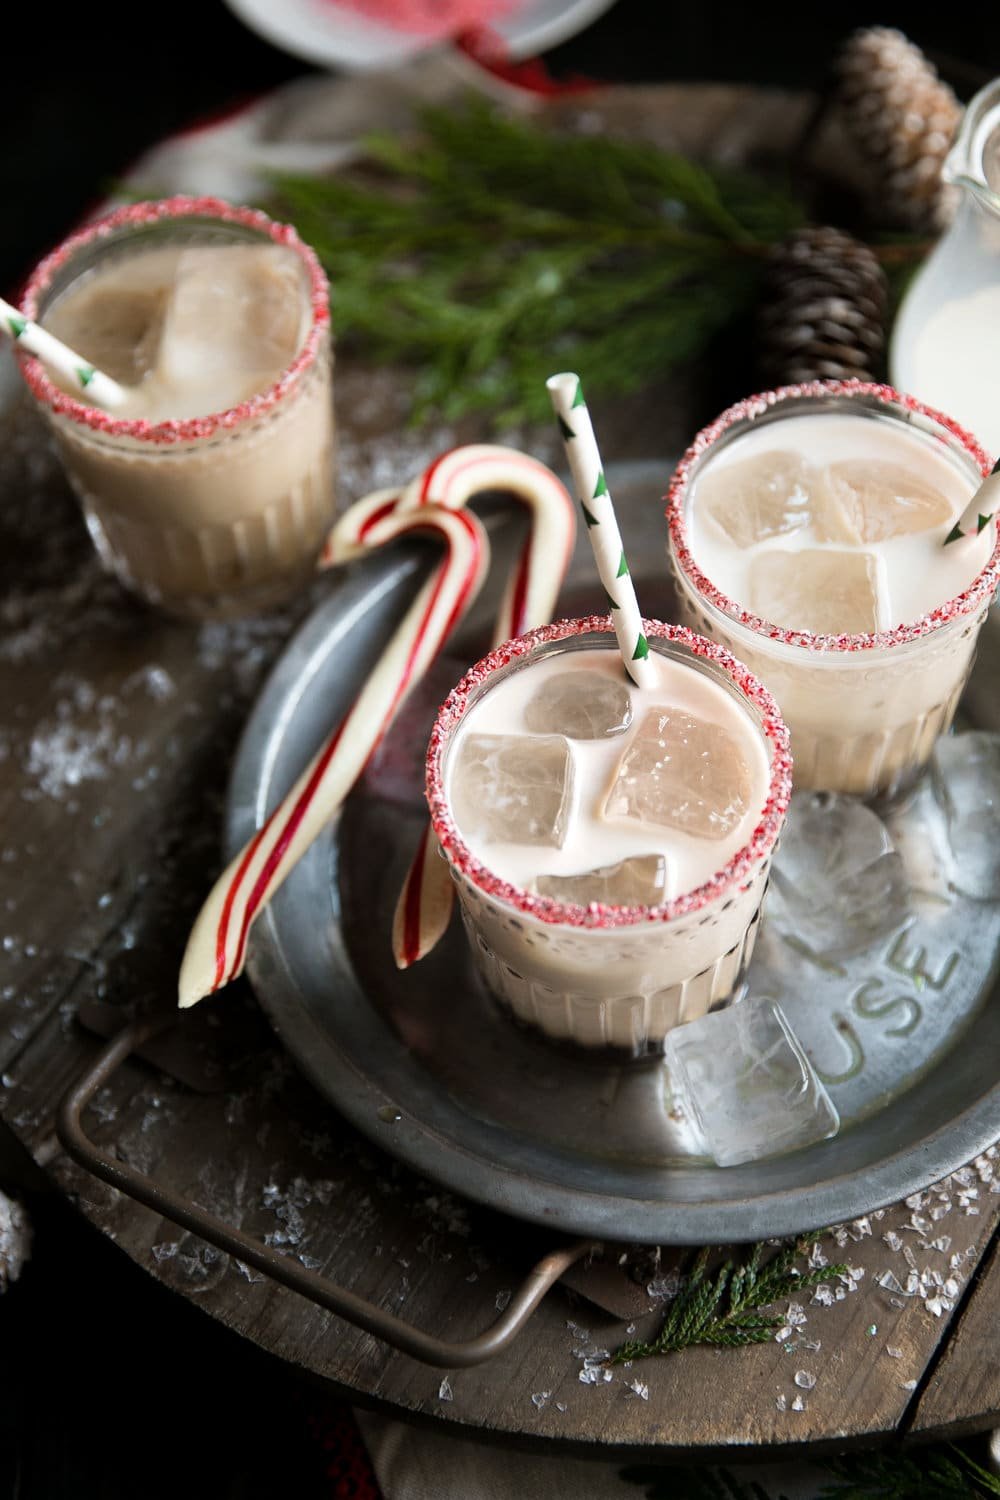 Holiday Peppermint White Russian. Made with Kahlúa, Peppermint Schnapps, and Vodka, this delicious cocktail is perfect for the cold holiday season.